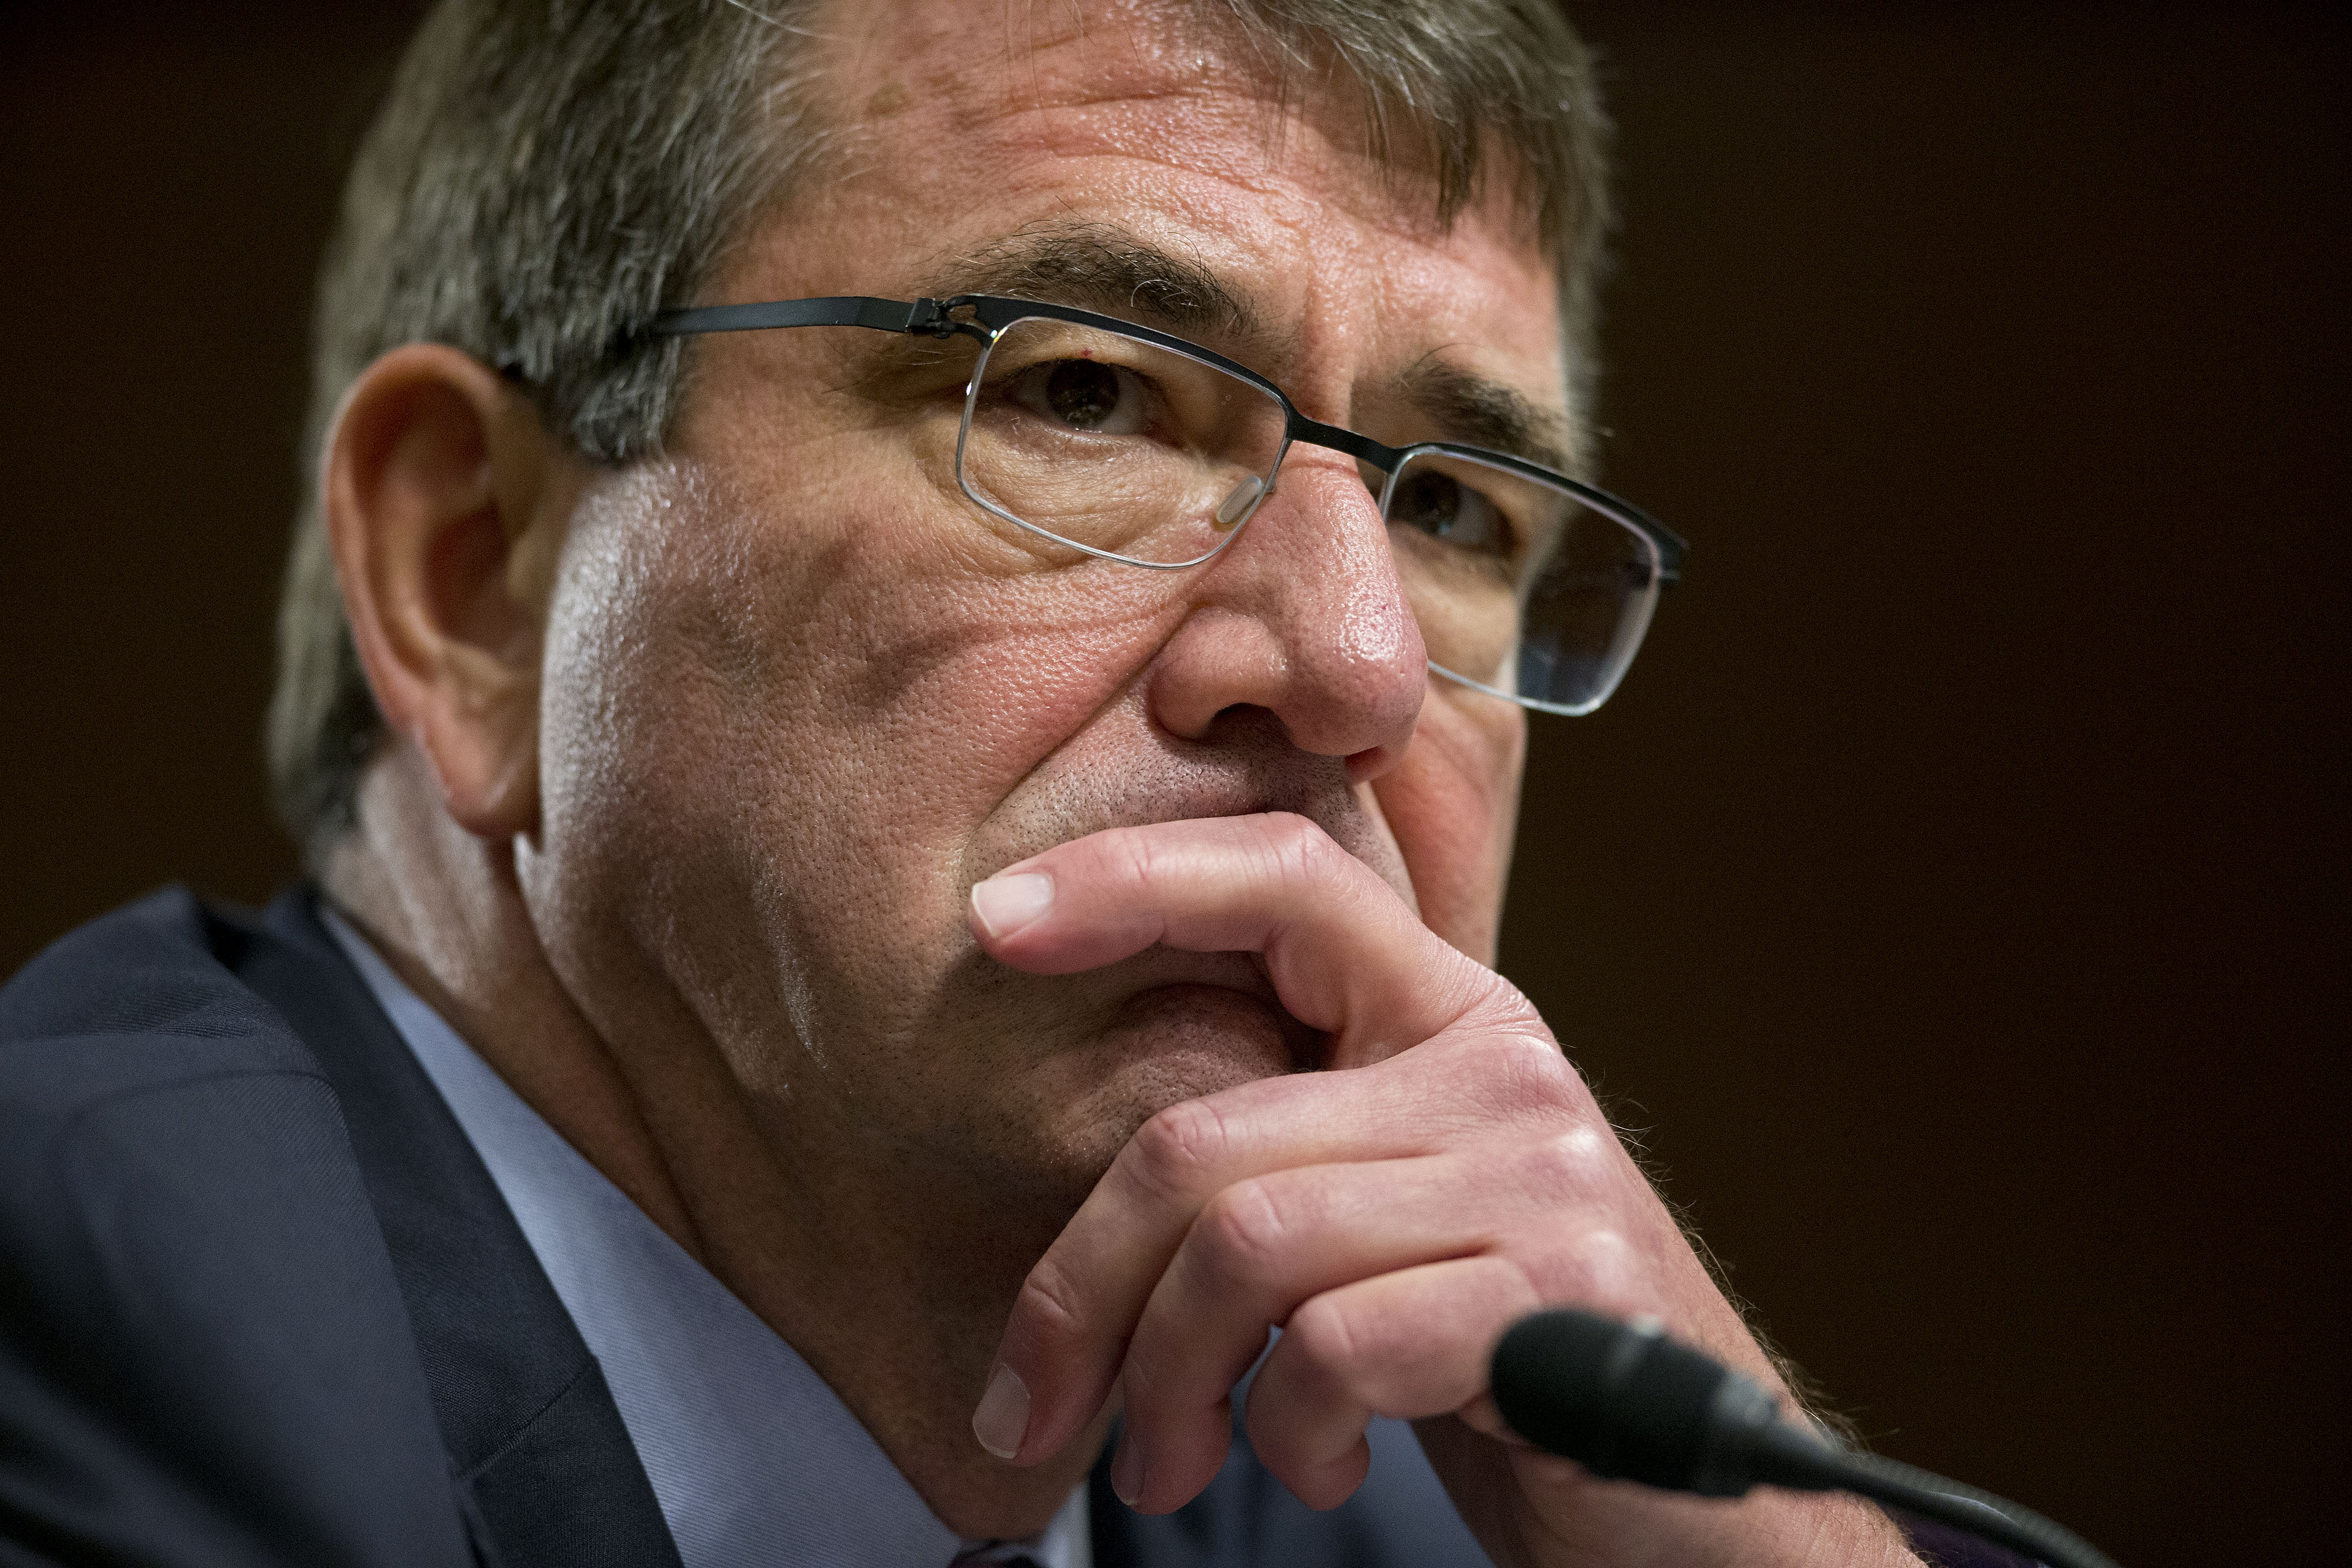 Ashton Carter listens during a Senate Armed Services Committee hearing on the U.S. military strategy in the Middle East in Washington, D.C. on Oct. 27, 2015. (Andrew Harrer—Bloomberg/Getty Images)